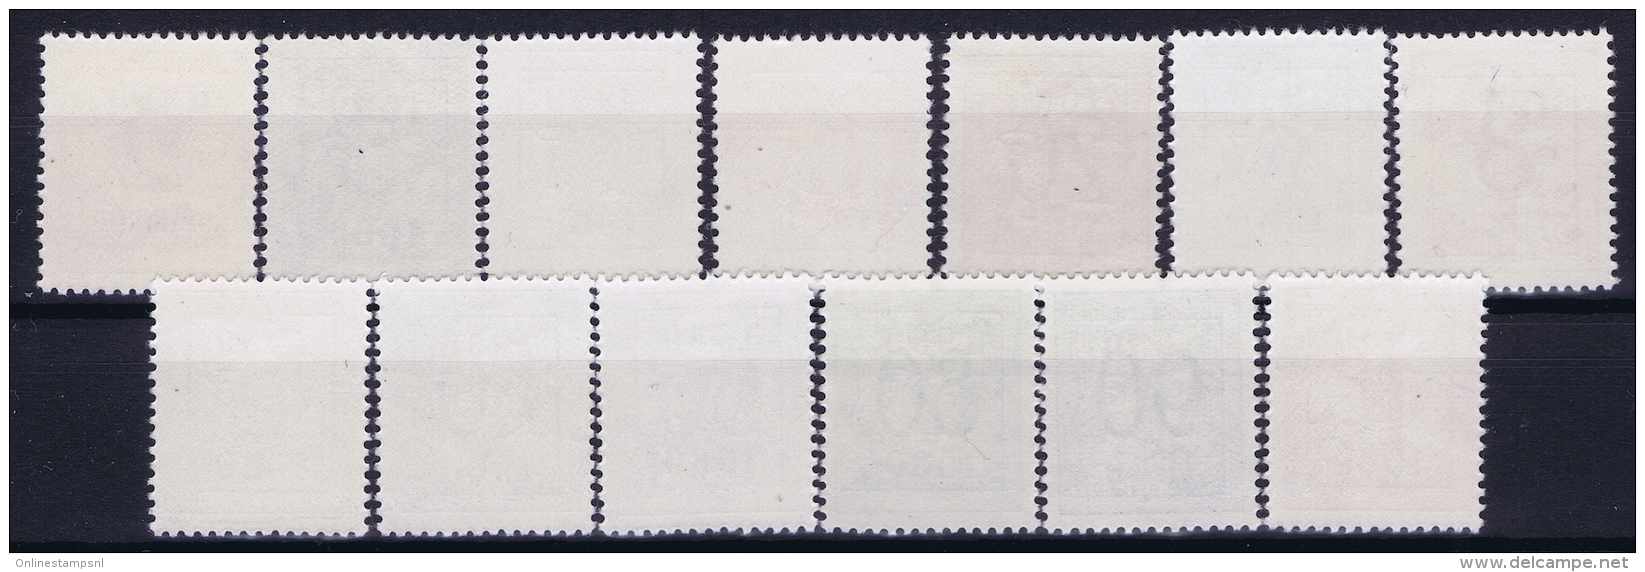 Belgium: OBP PRE686 - PRE698  Postfrisch/neuf Sans Charniere /MNH/** 1959 - Typo Precancels 1936-51 (Small Seal Of The State)